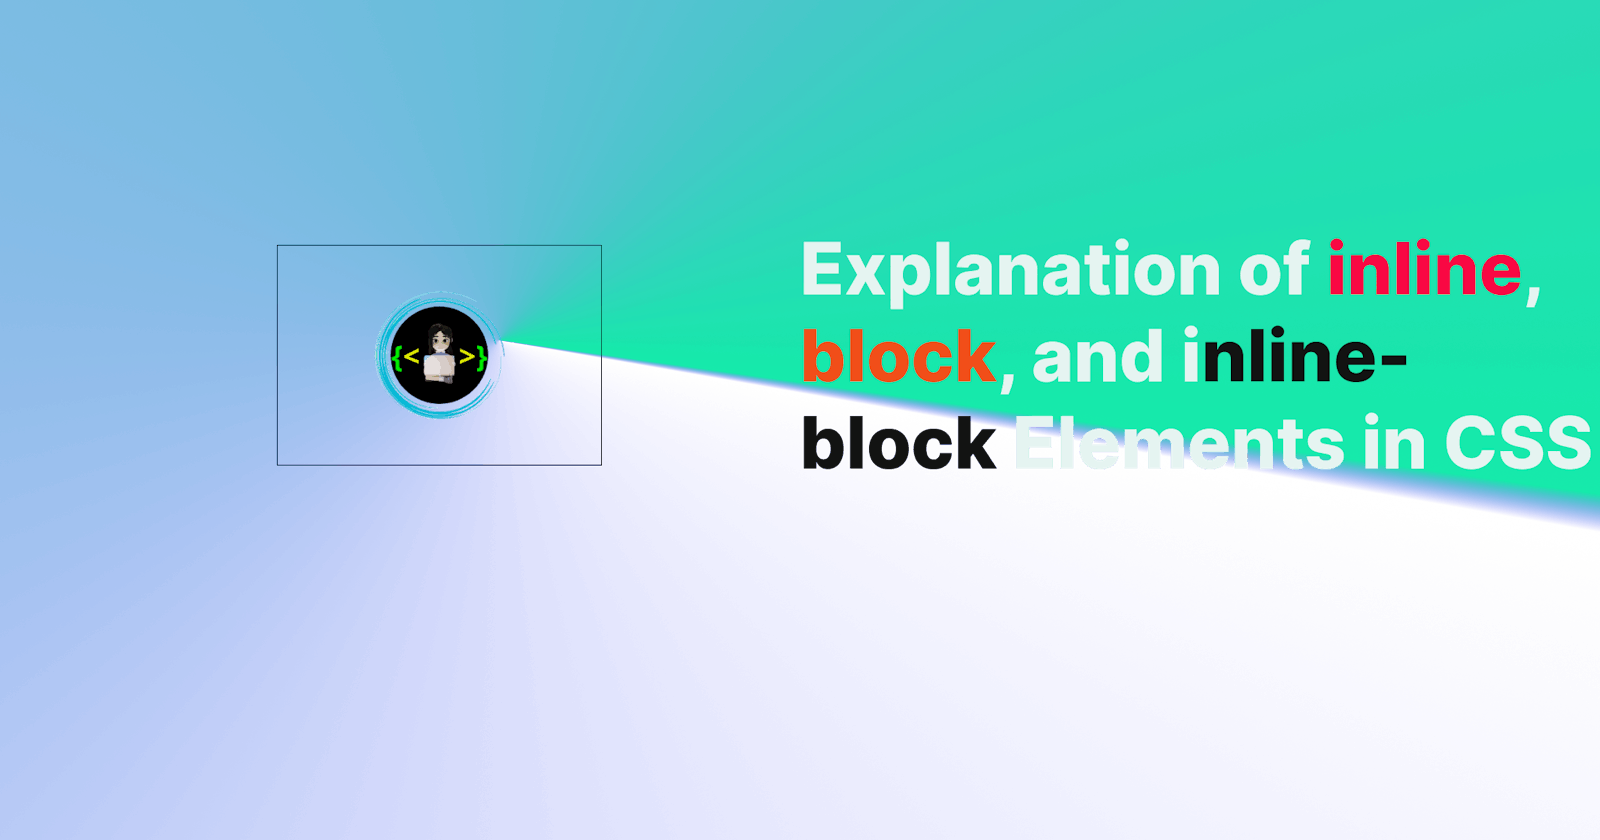 Explanation of inline, block, and inline-block elements in css🎯